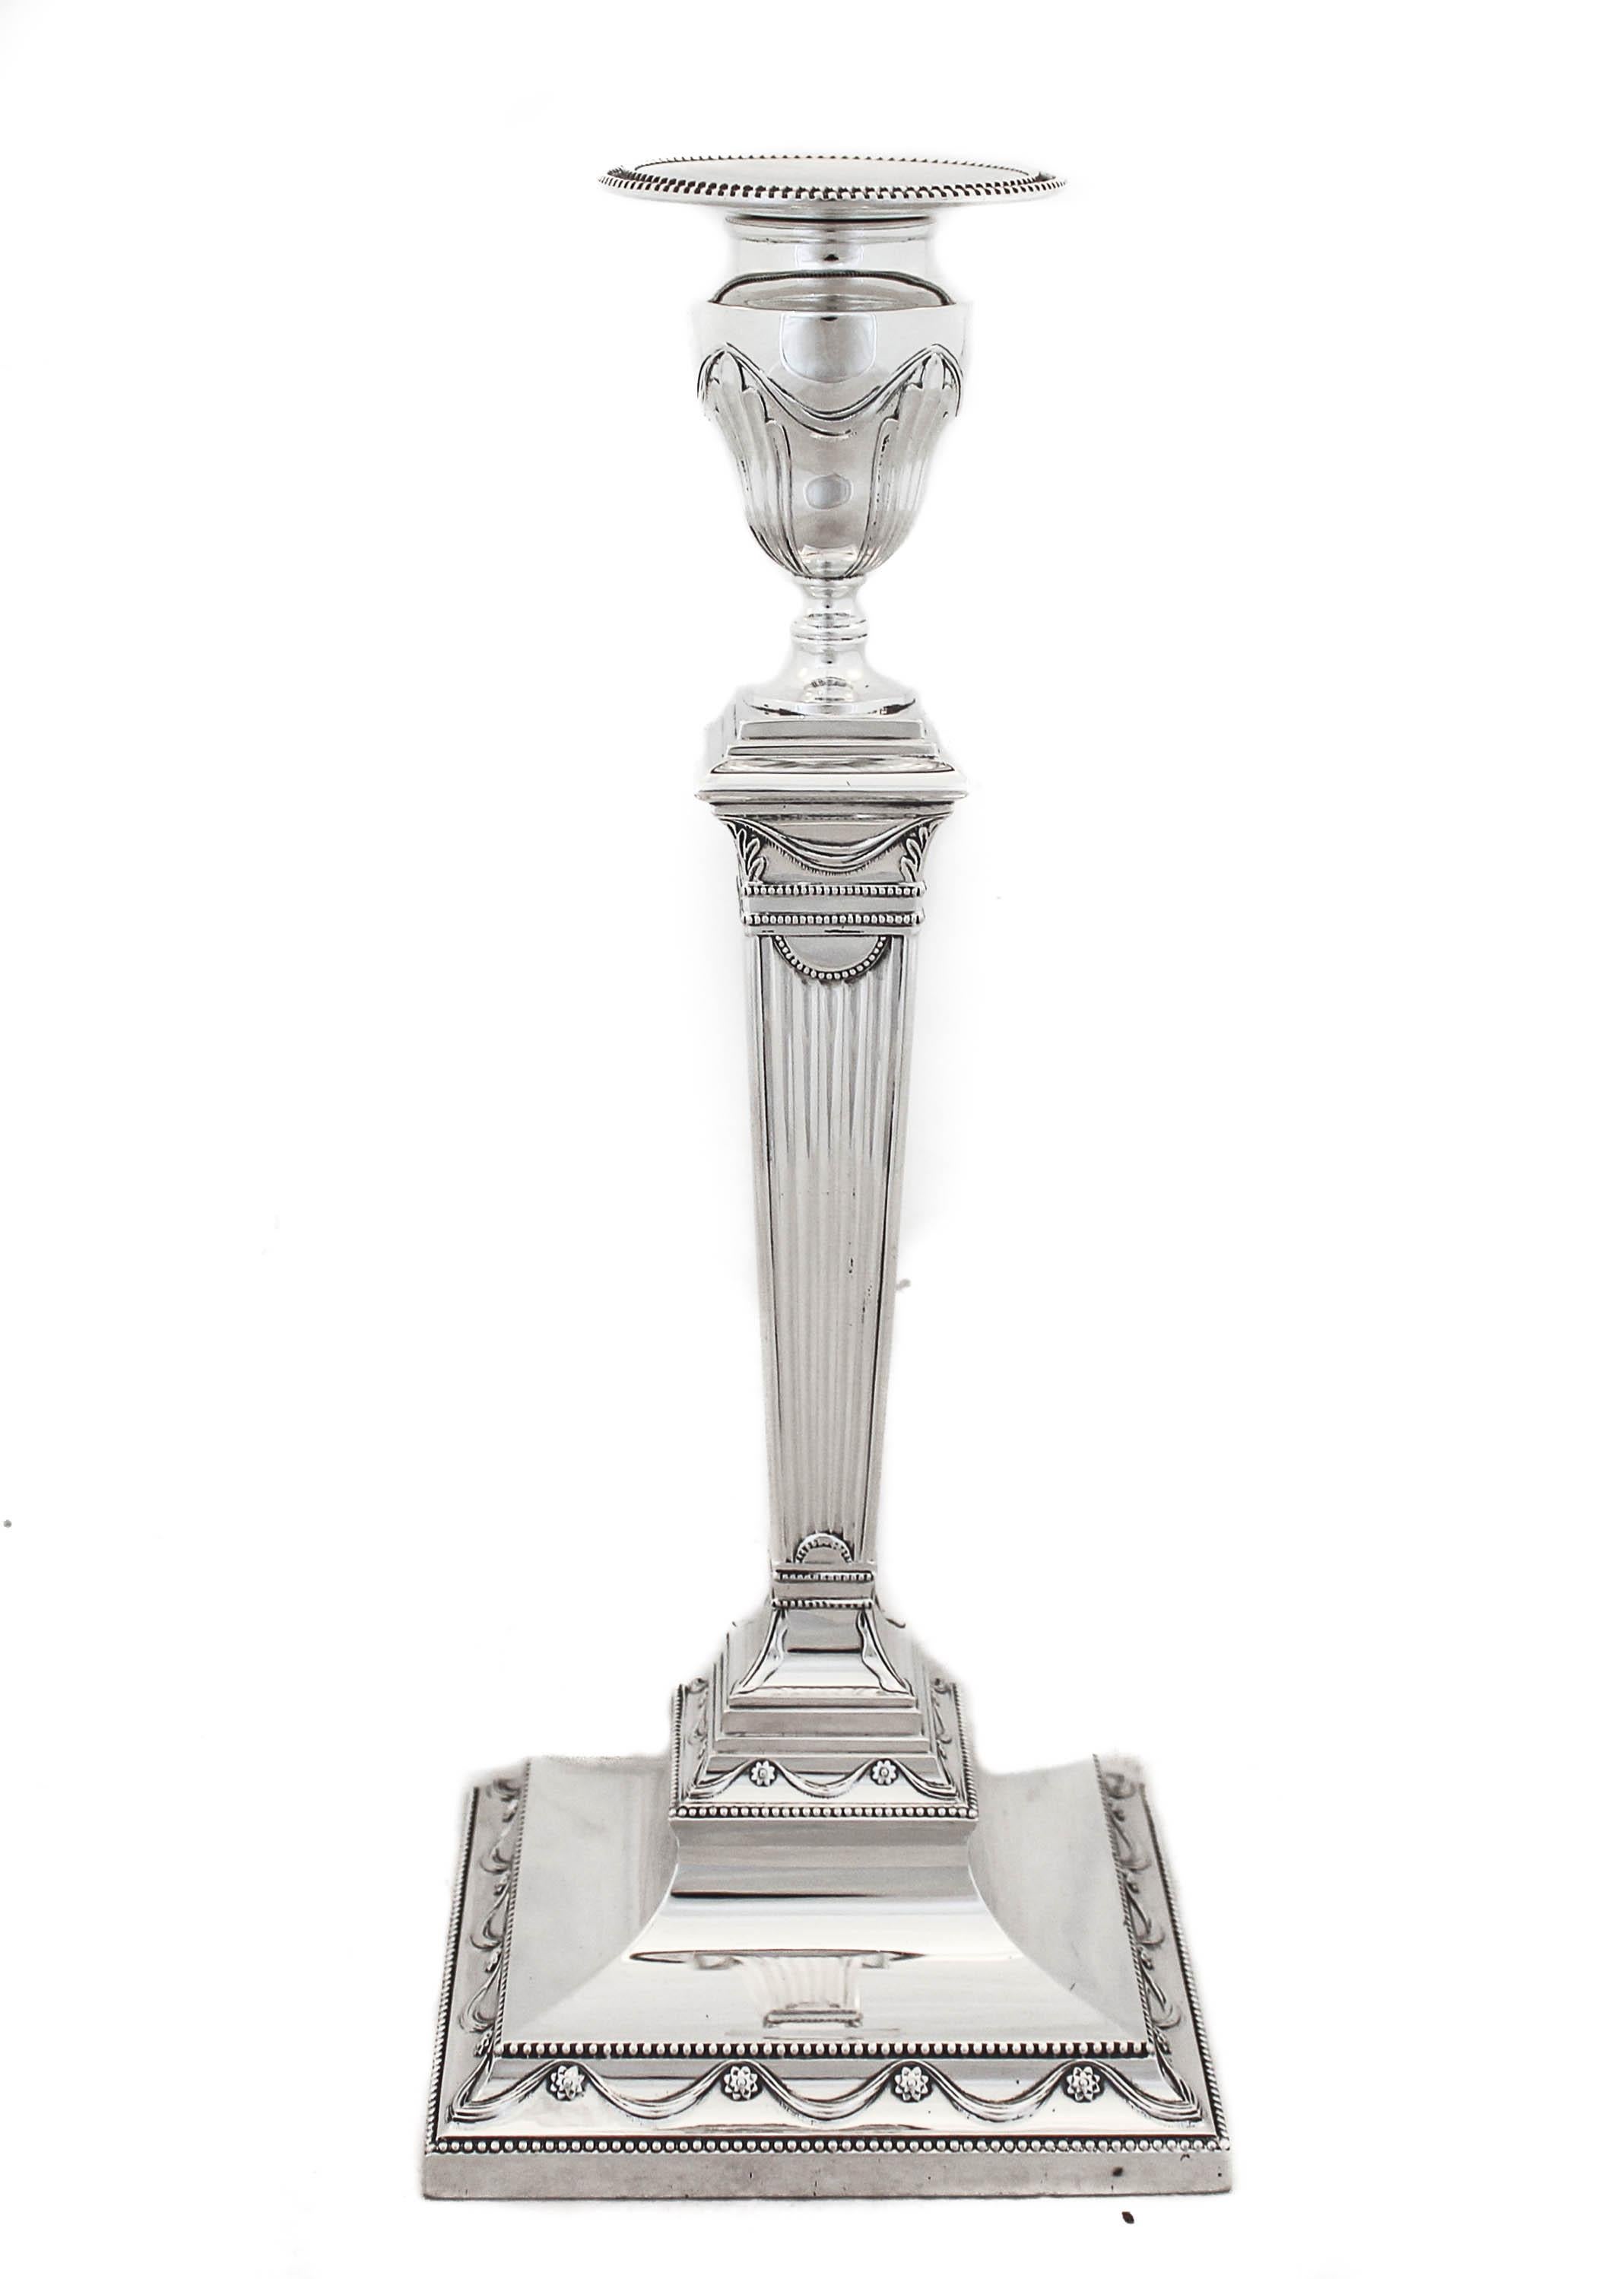 We are thrilled to offer you this pair of sterling silver candlesticks by the world renowned Tiffany & Company. They have a real presence with their large square base and height. The workmanship is exquisite with each detail just perfect. Notice the